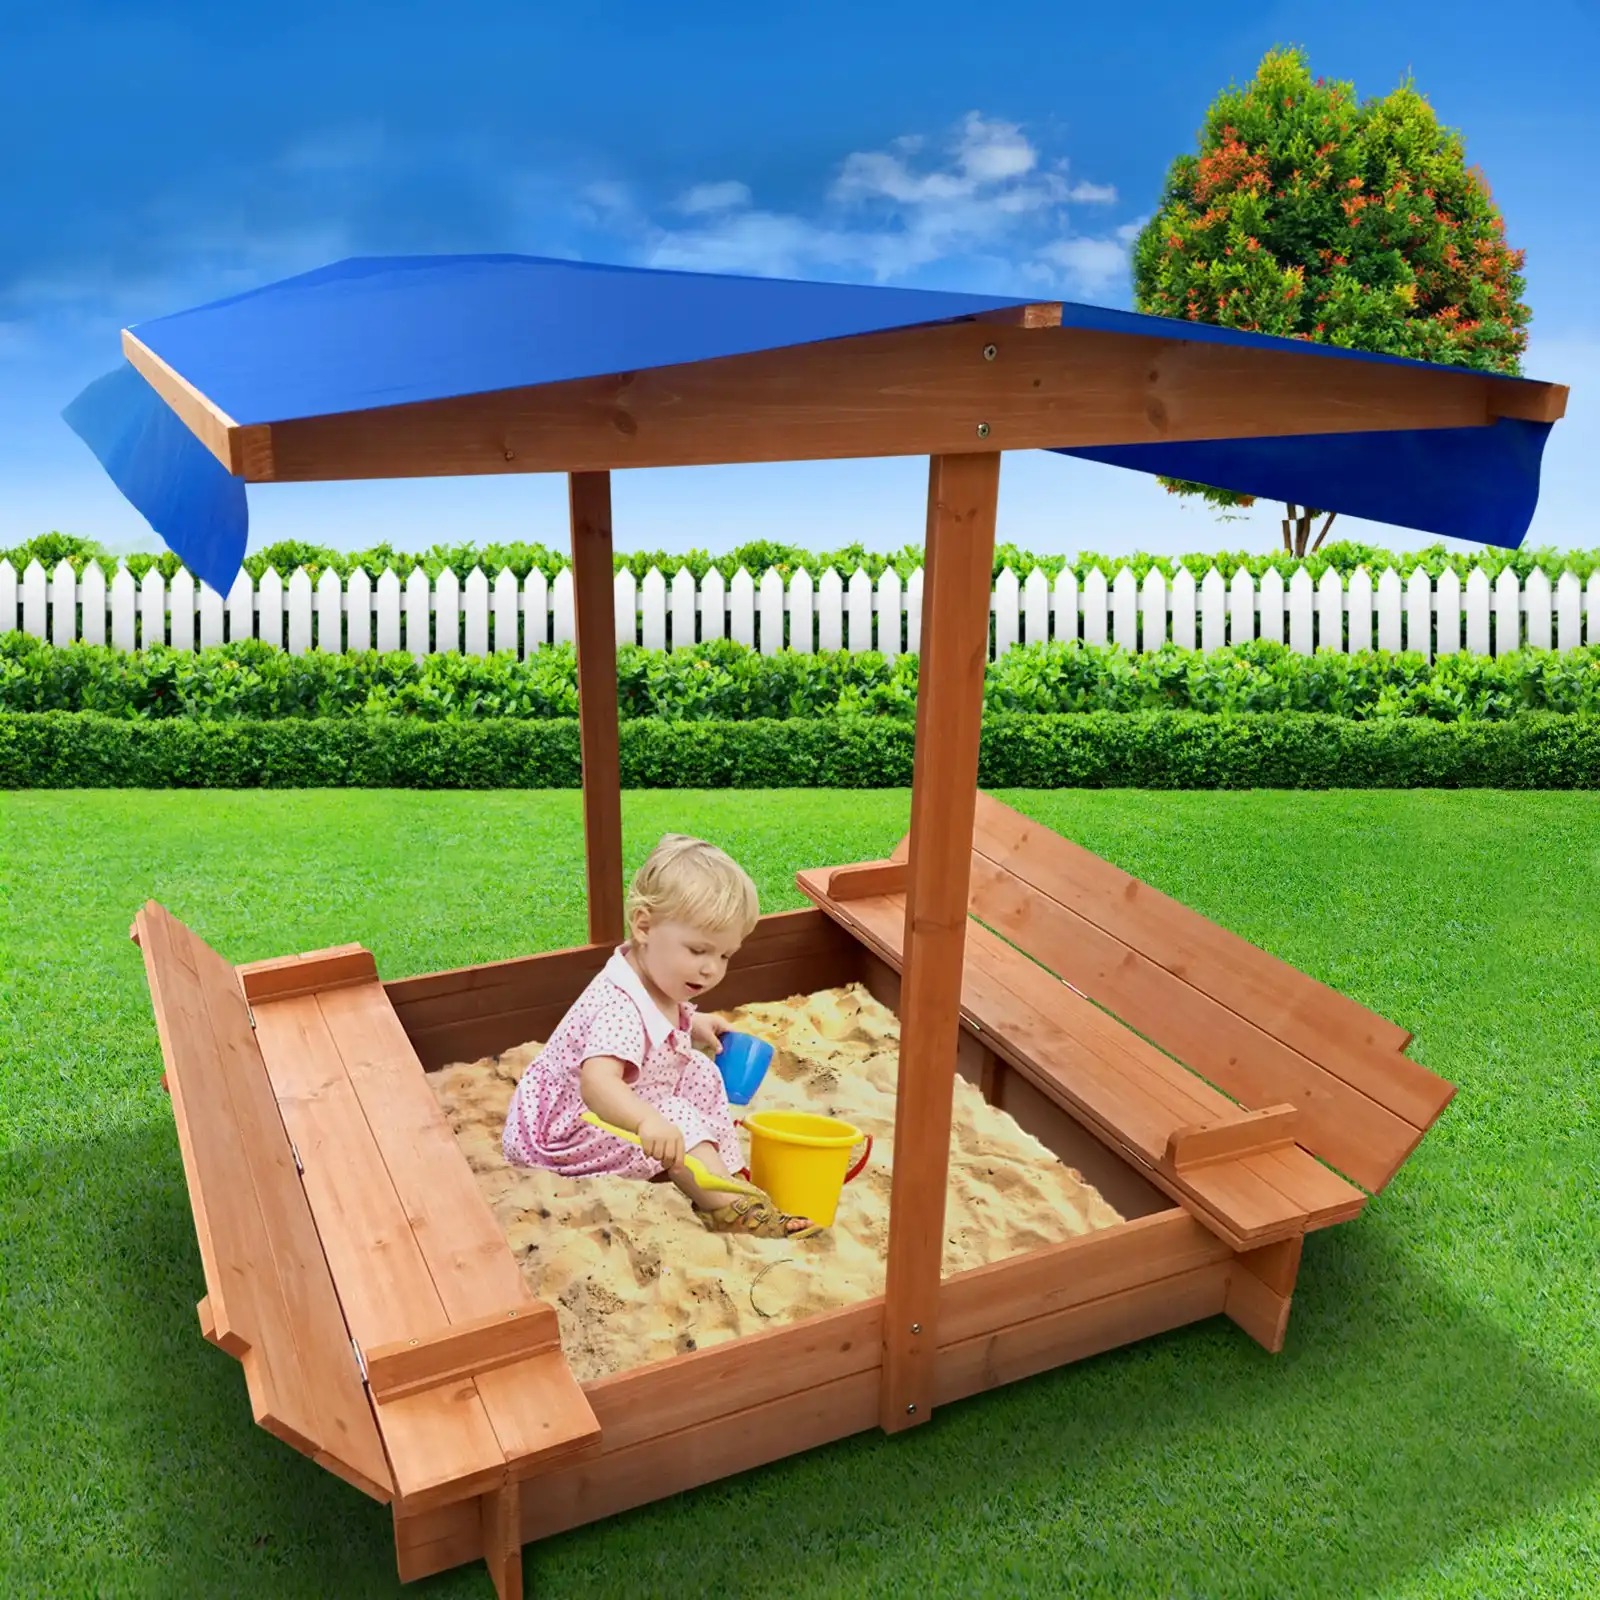 Keezi Kids Sandpit Toys Canopy Sand Pit Box Wooden Outdoor Play Set Large Seat Fun